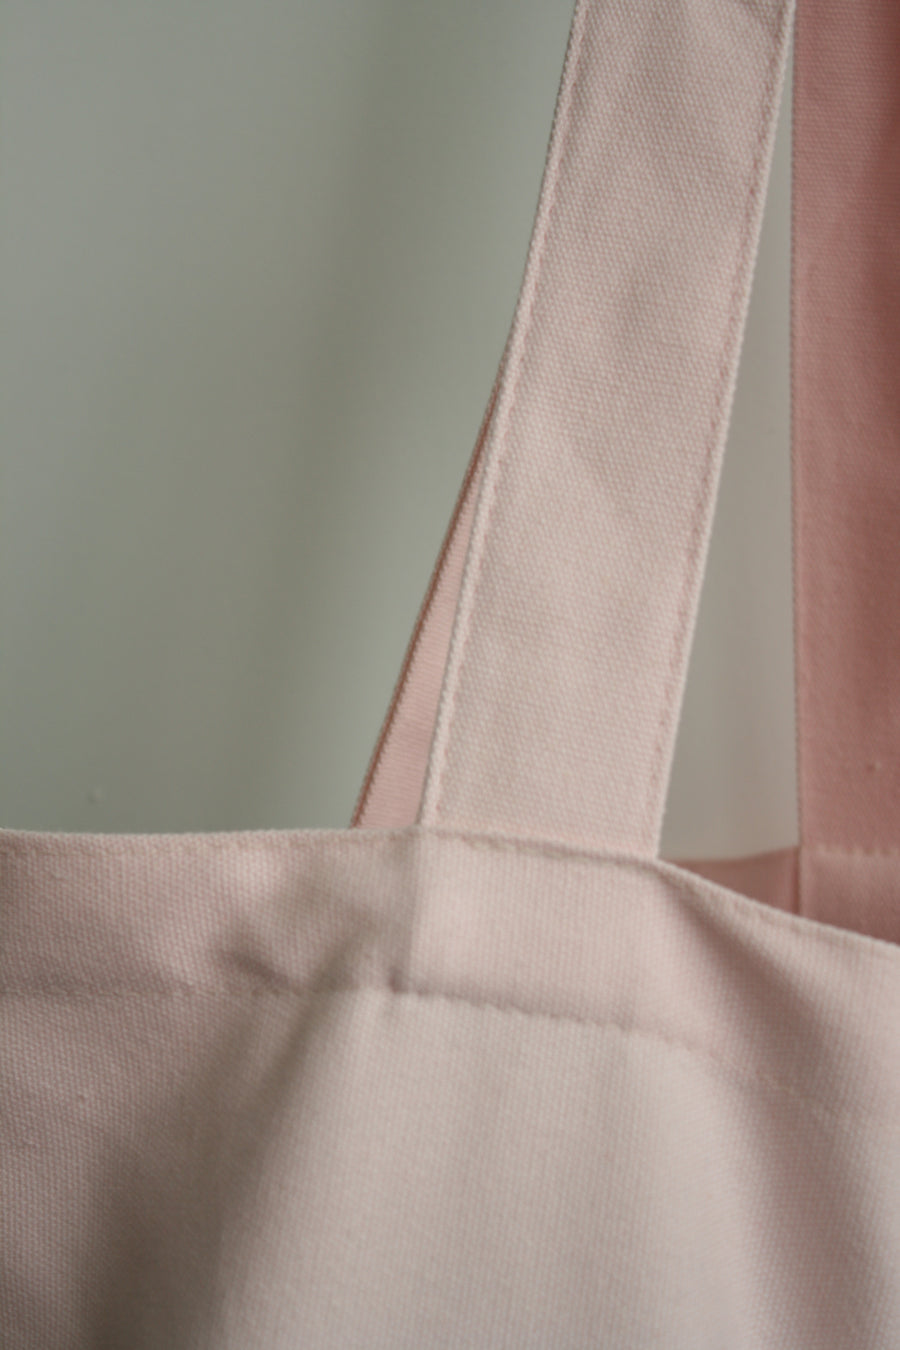 Drapers Tote - Marshmallow